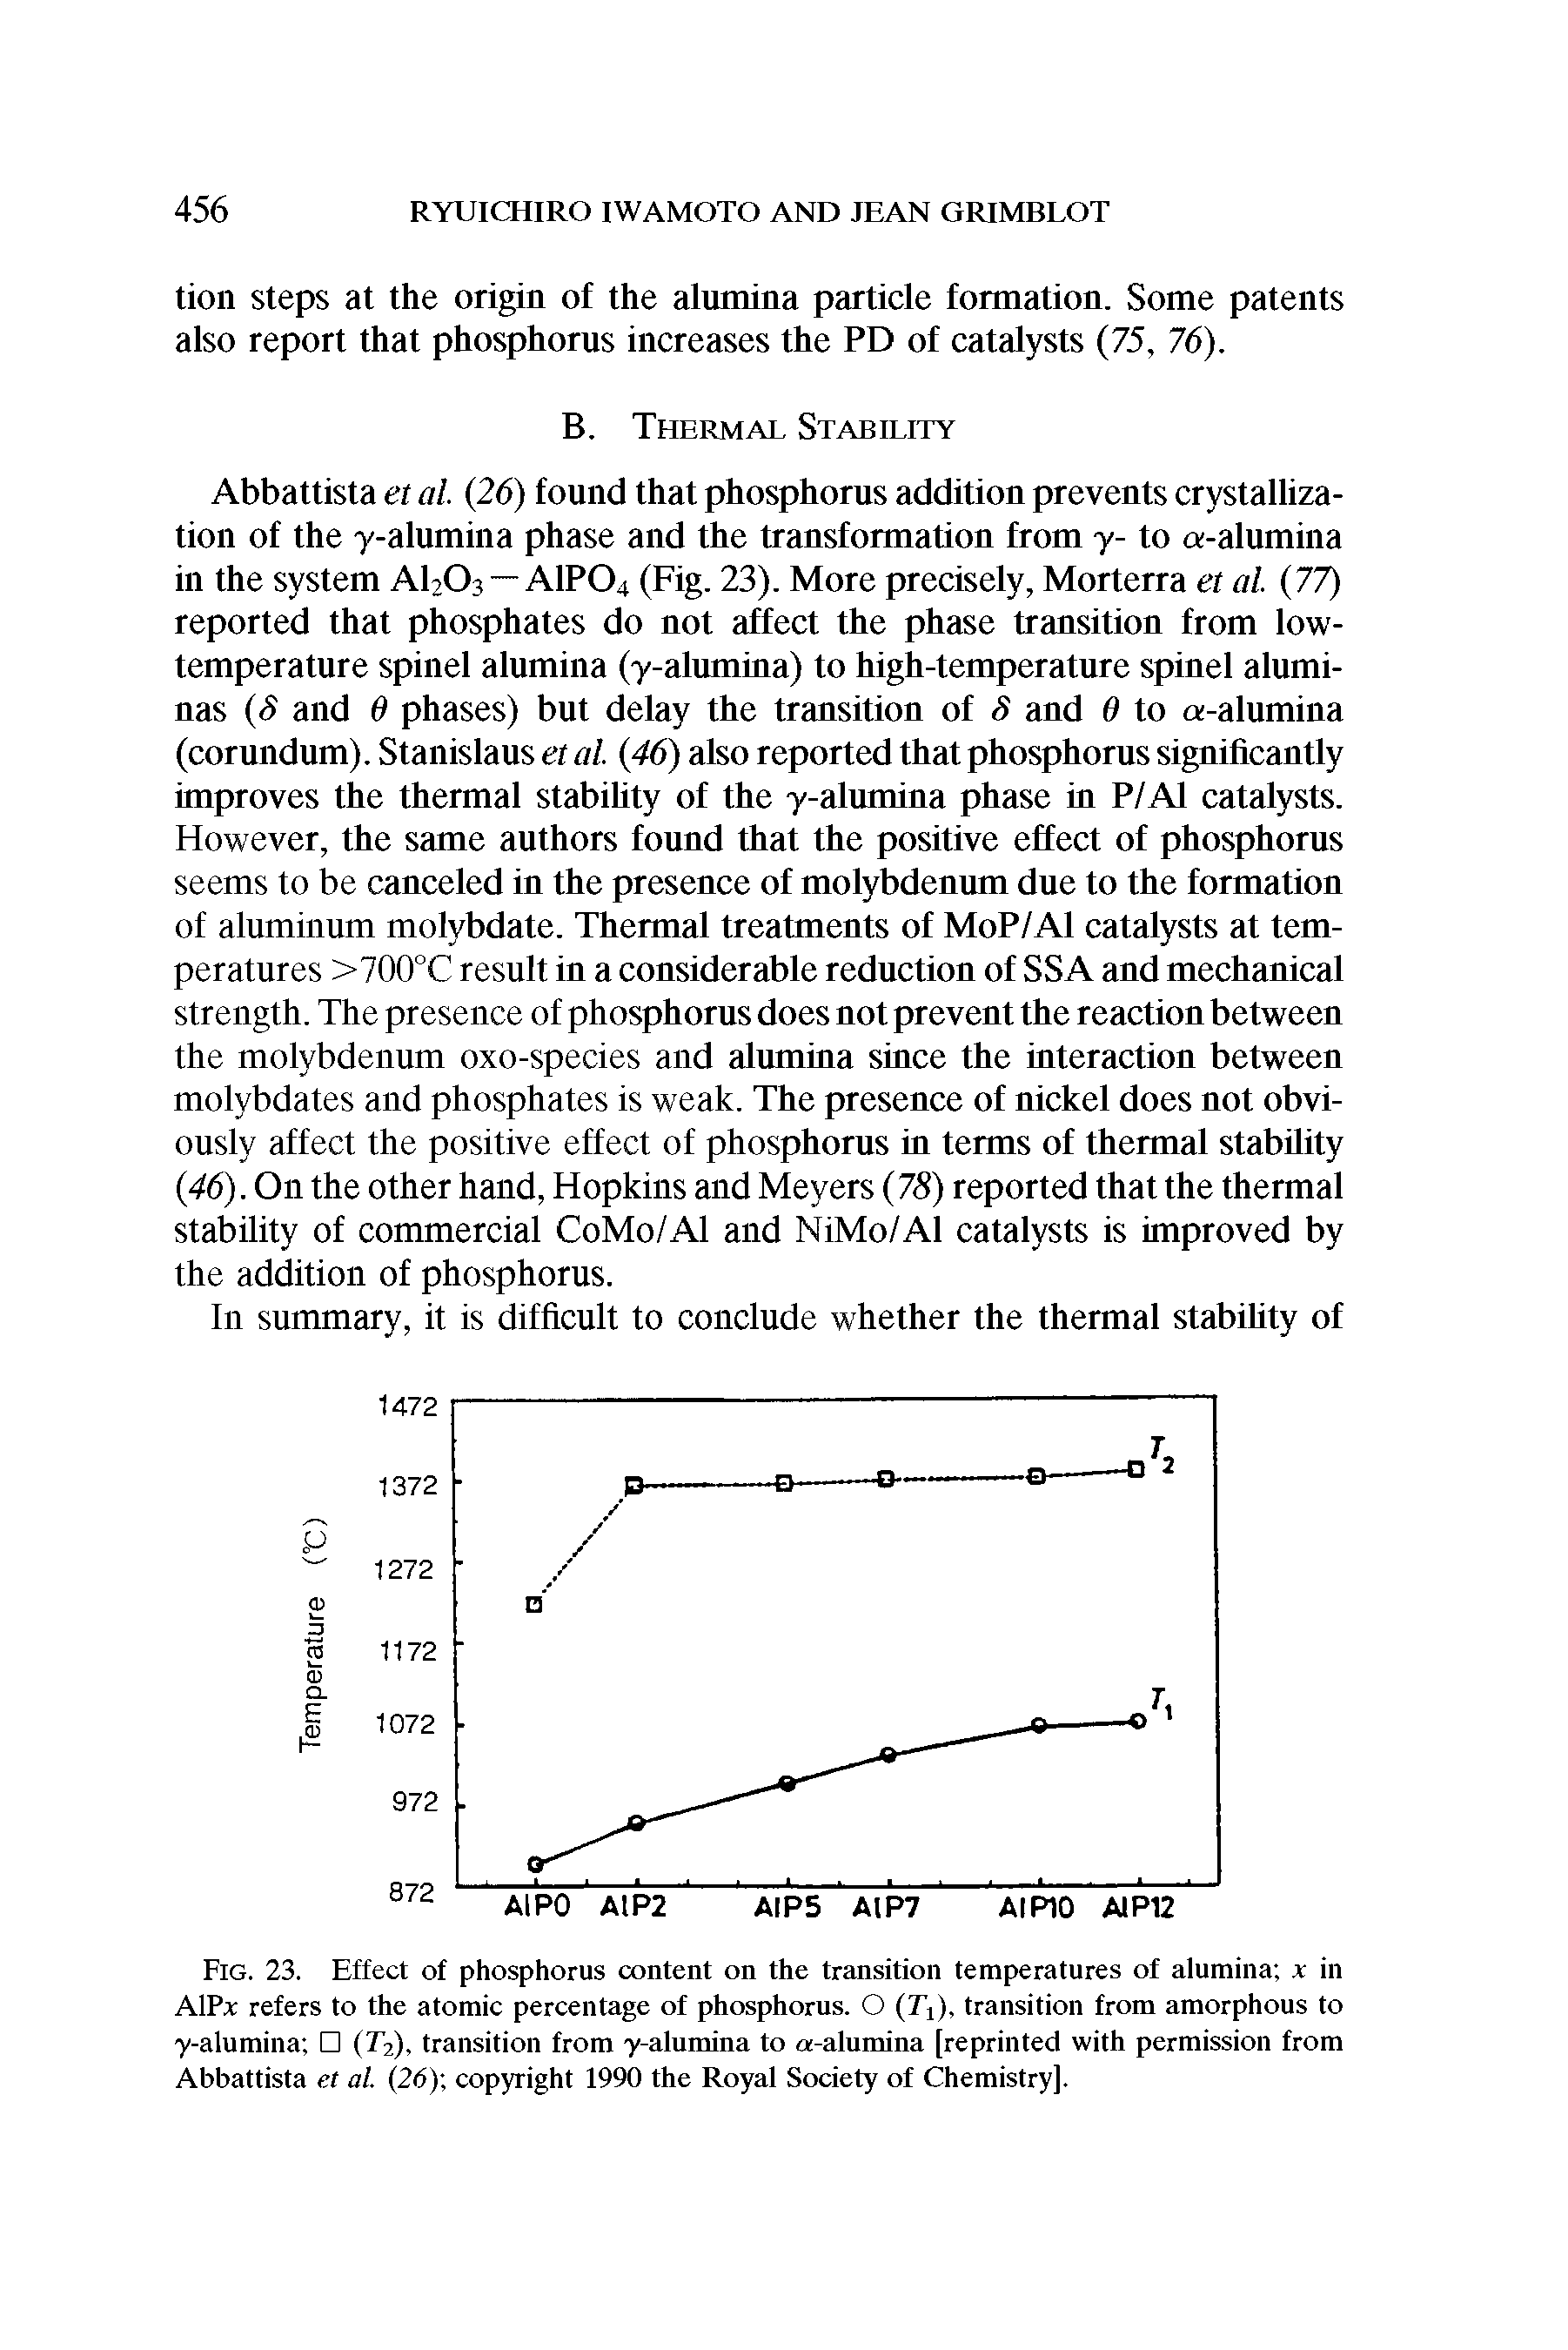 Fig. 23. Effect of phosphorus content on the transition temperatures of alumina x in AIP3 refers to the atomic percentage of phosphorus. O (Ti), transition from amorphous to 7-alumina (A), transition from y-alumina to a-alumina [reprinted with permission from Abbattista et al. (26) copyright 1990 the Royal Society of Chemistry].